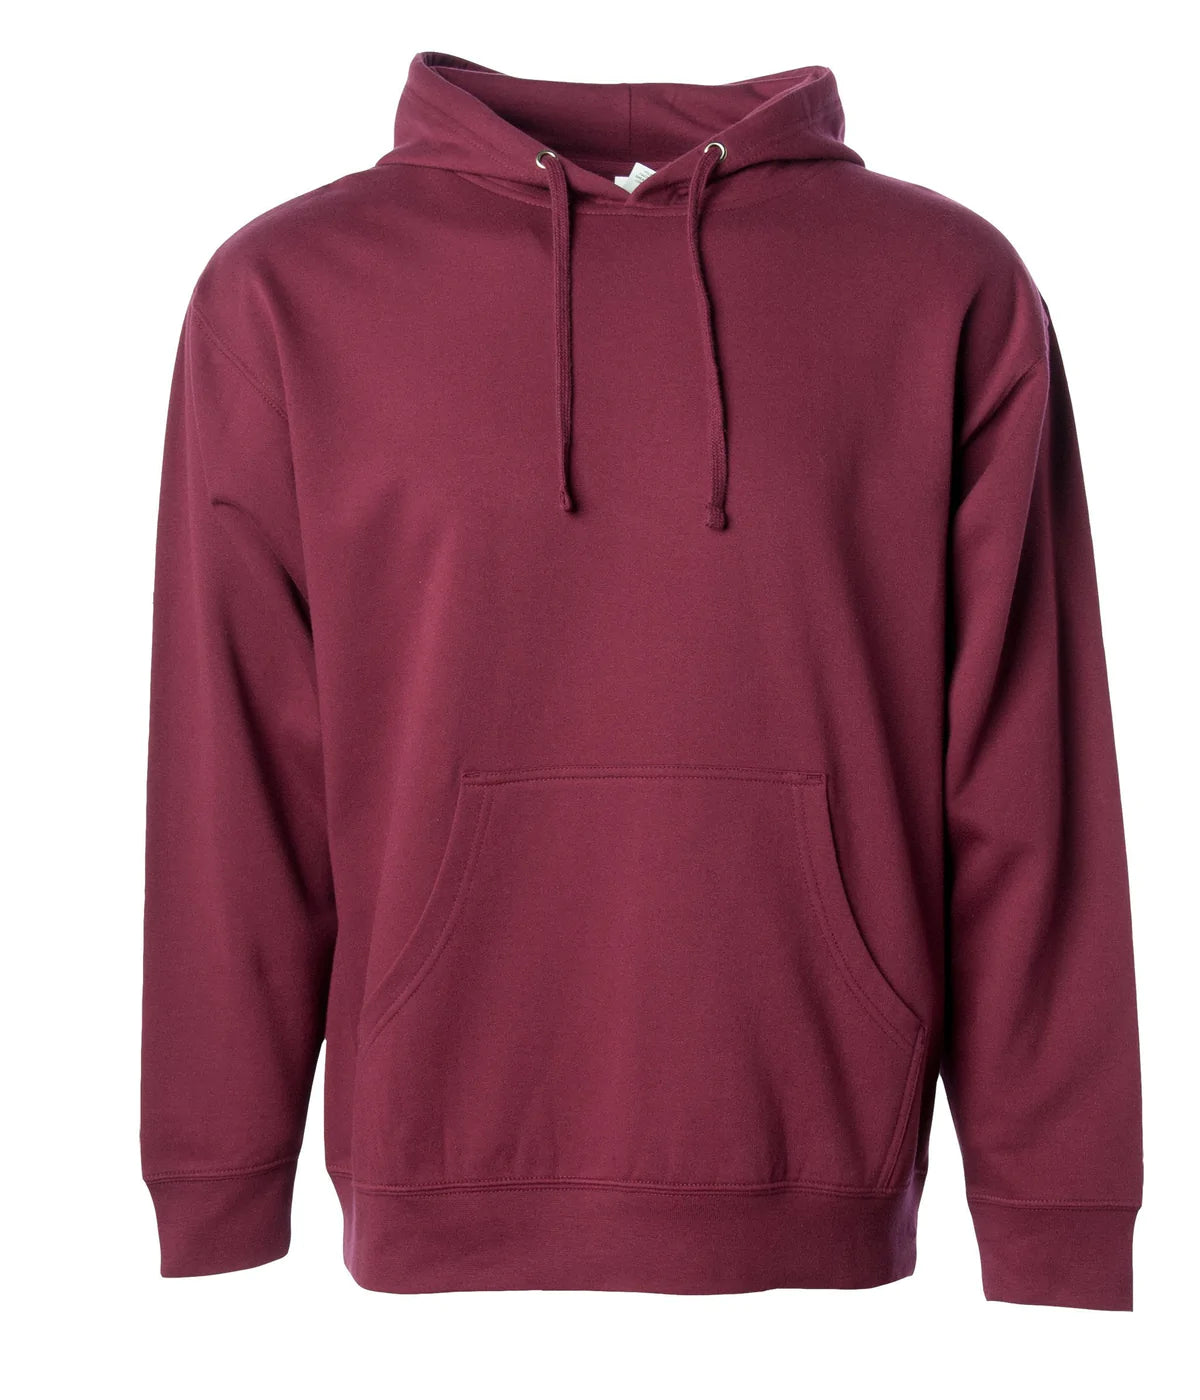 SS4500 - Midweight Hooded Pullover Sweatshirt